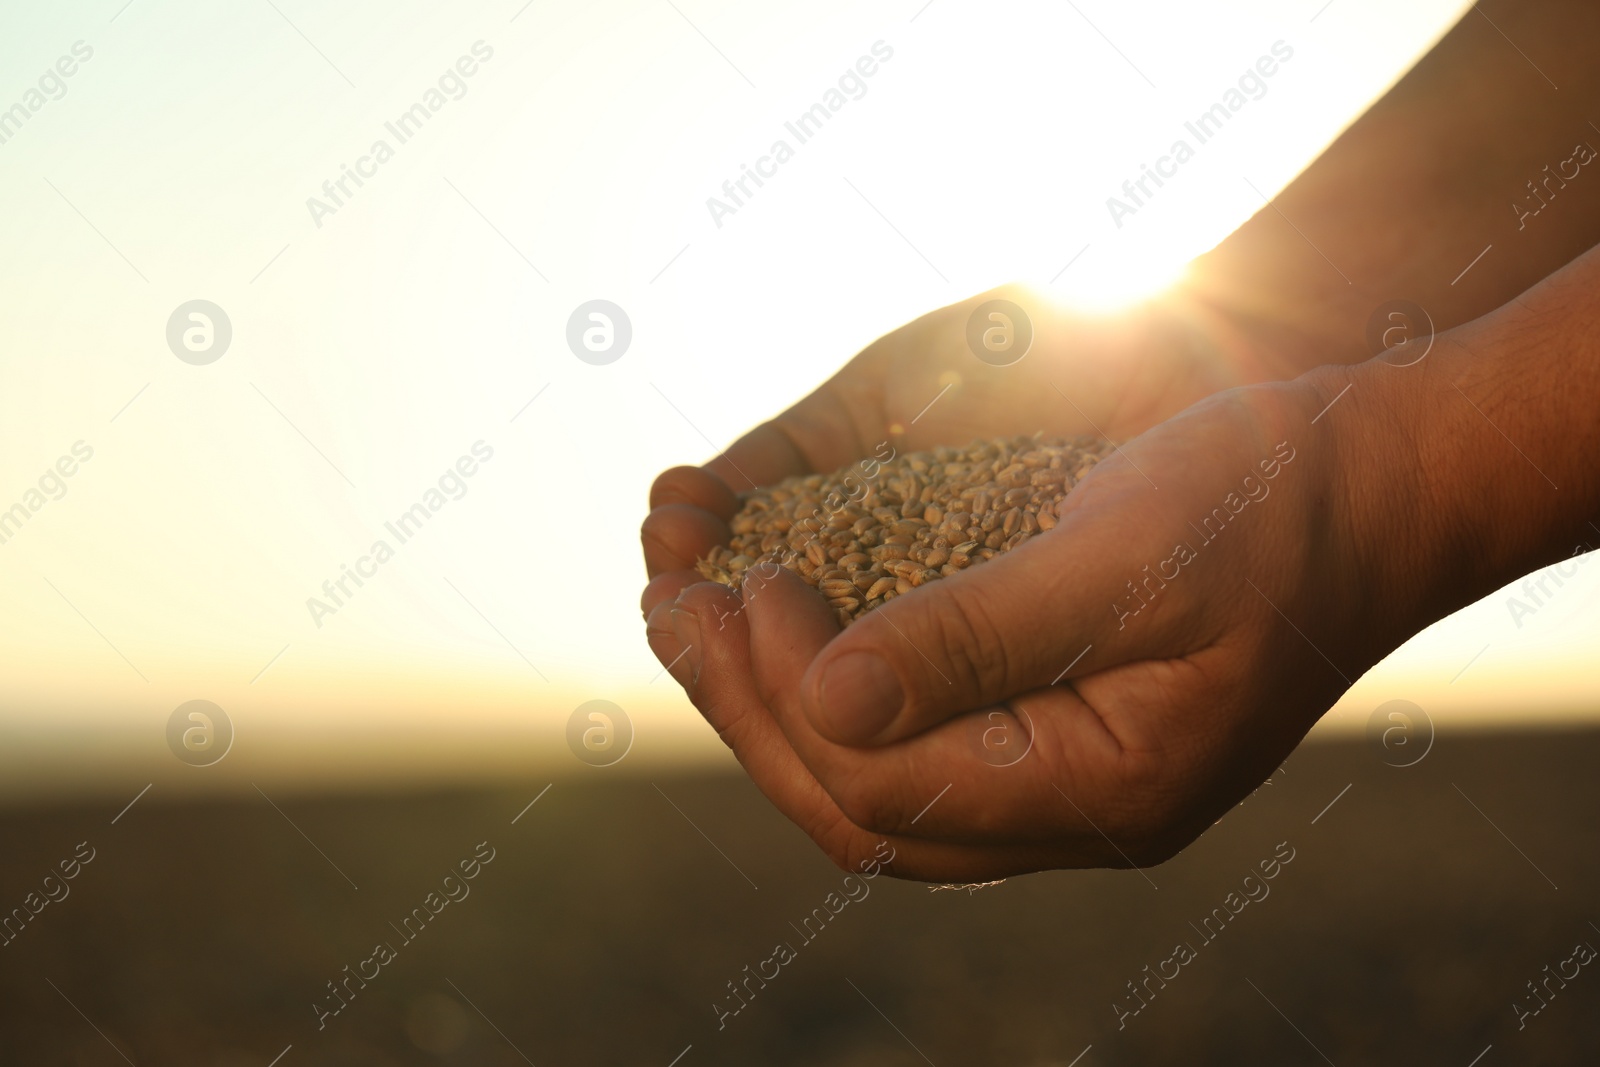 Photo of Man holding handful of wheat grains in field on sunny day, closeup